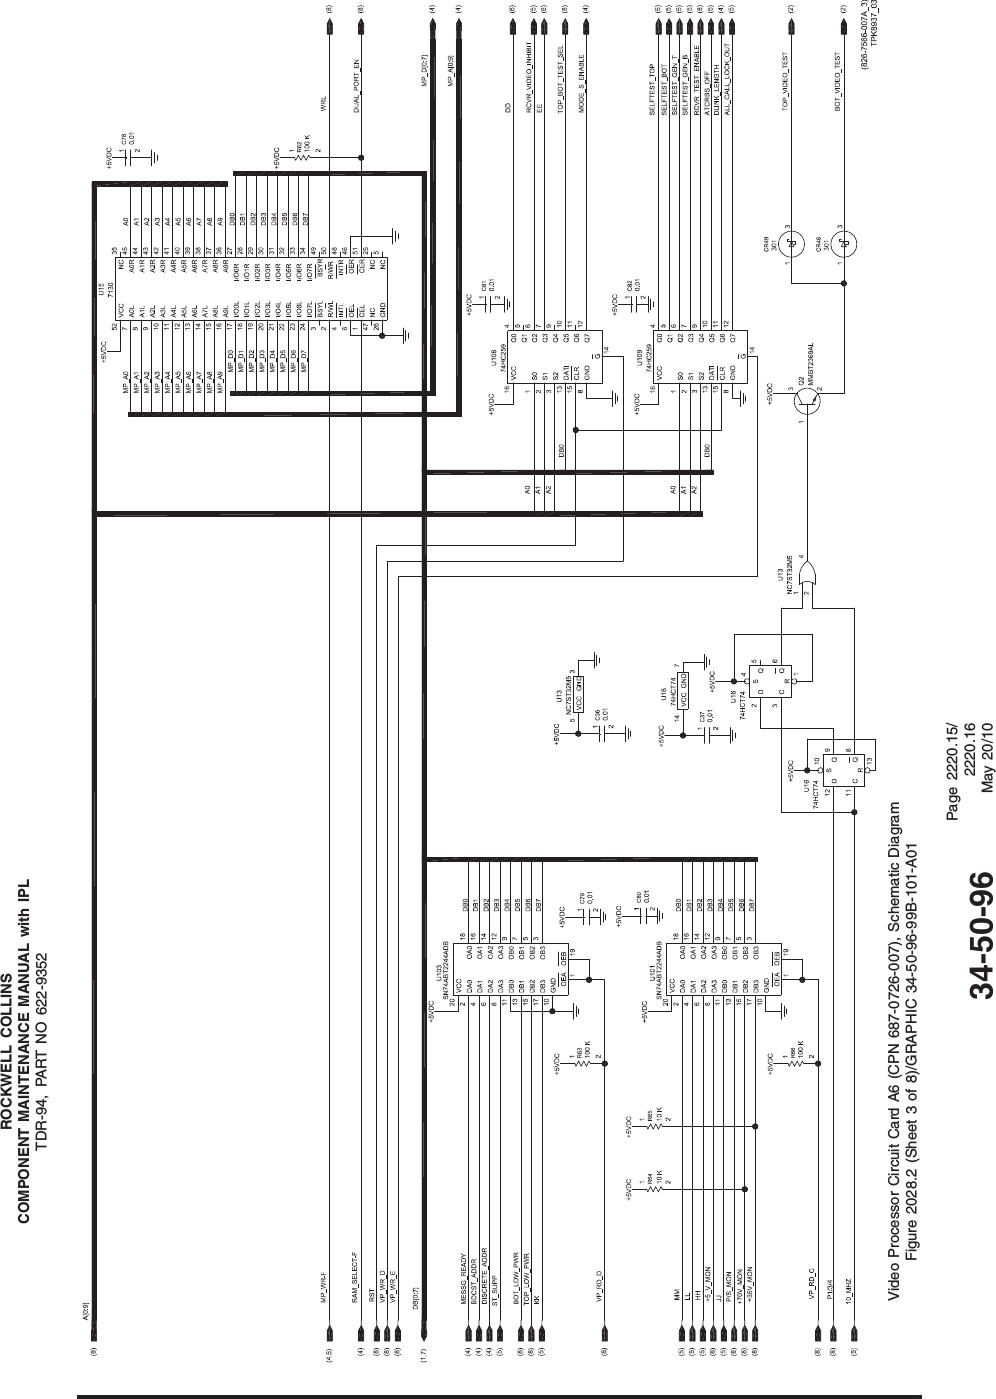 ROCKWELL COLLINSCOMPONENT MAINTENANCE MANUAL with IPLTDR-94, PART NO 622-9352Video Processor Circuit Card A6 (CPN 687-0726-007), Schematic DiagramFigure 2028.2 (Sheet 3 of 8)/GRAPHIC 34-50-96-99B-101-A0134-50-96Page 2220.15/2220.16May 20/10